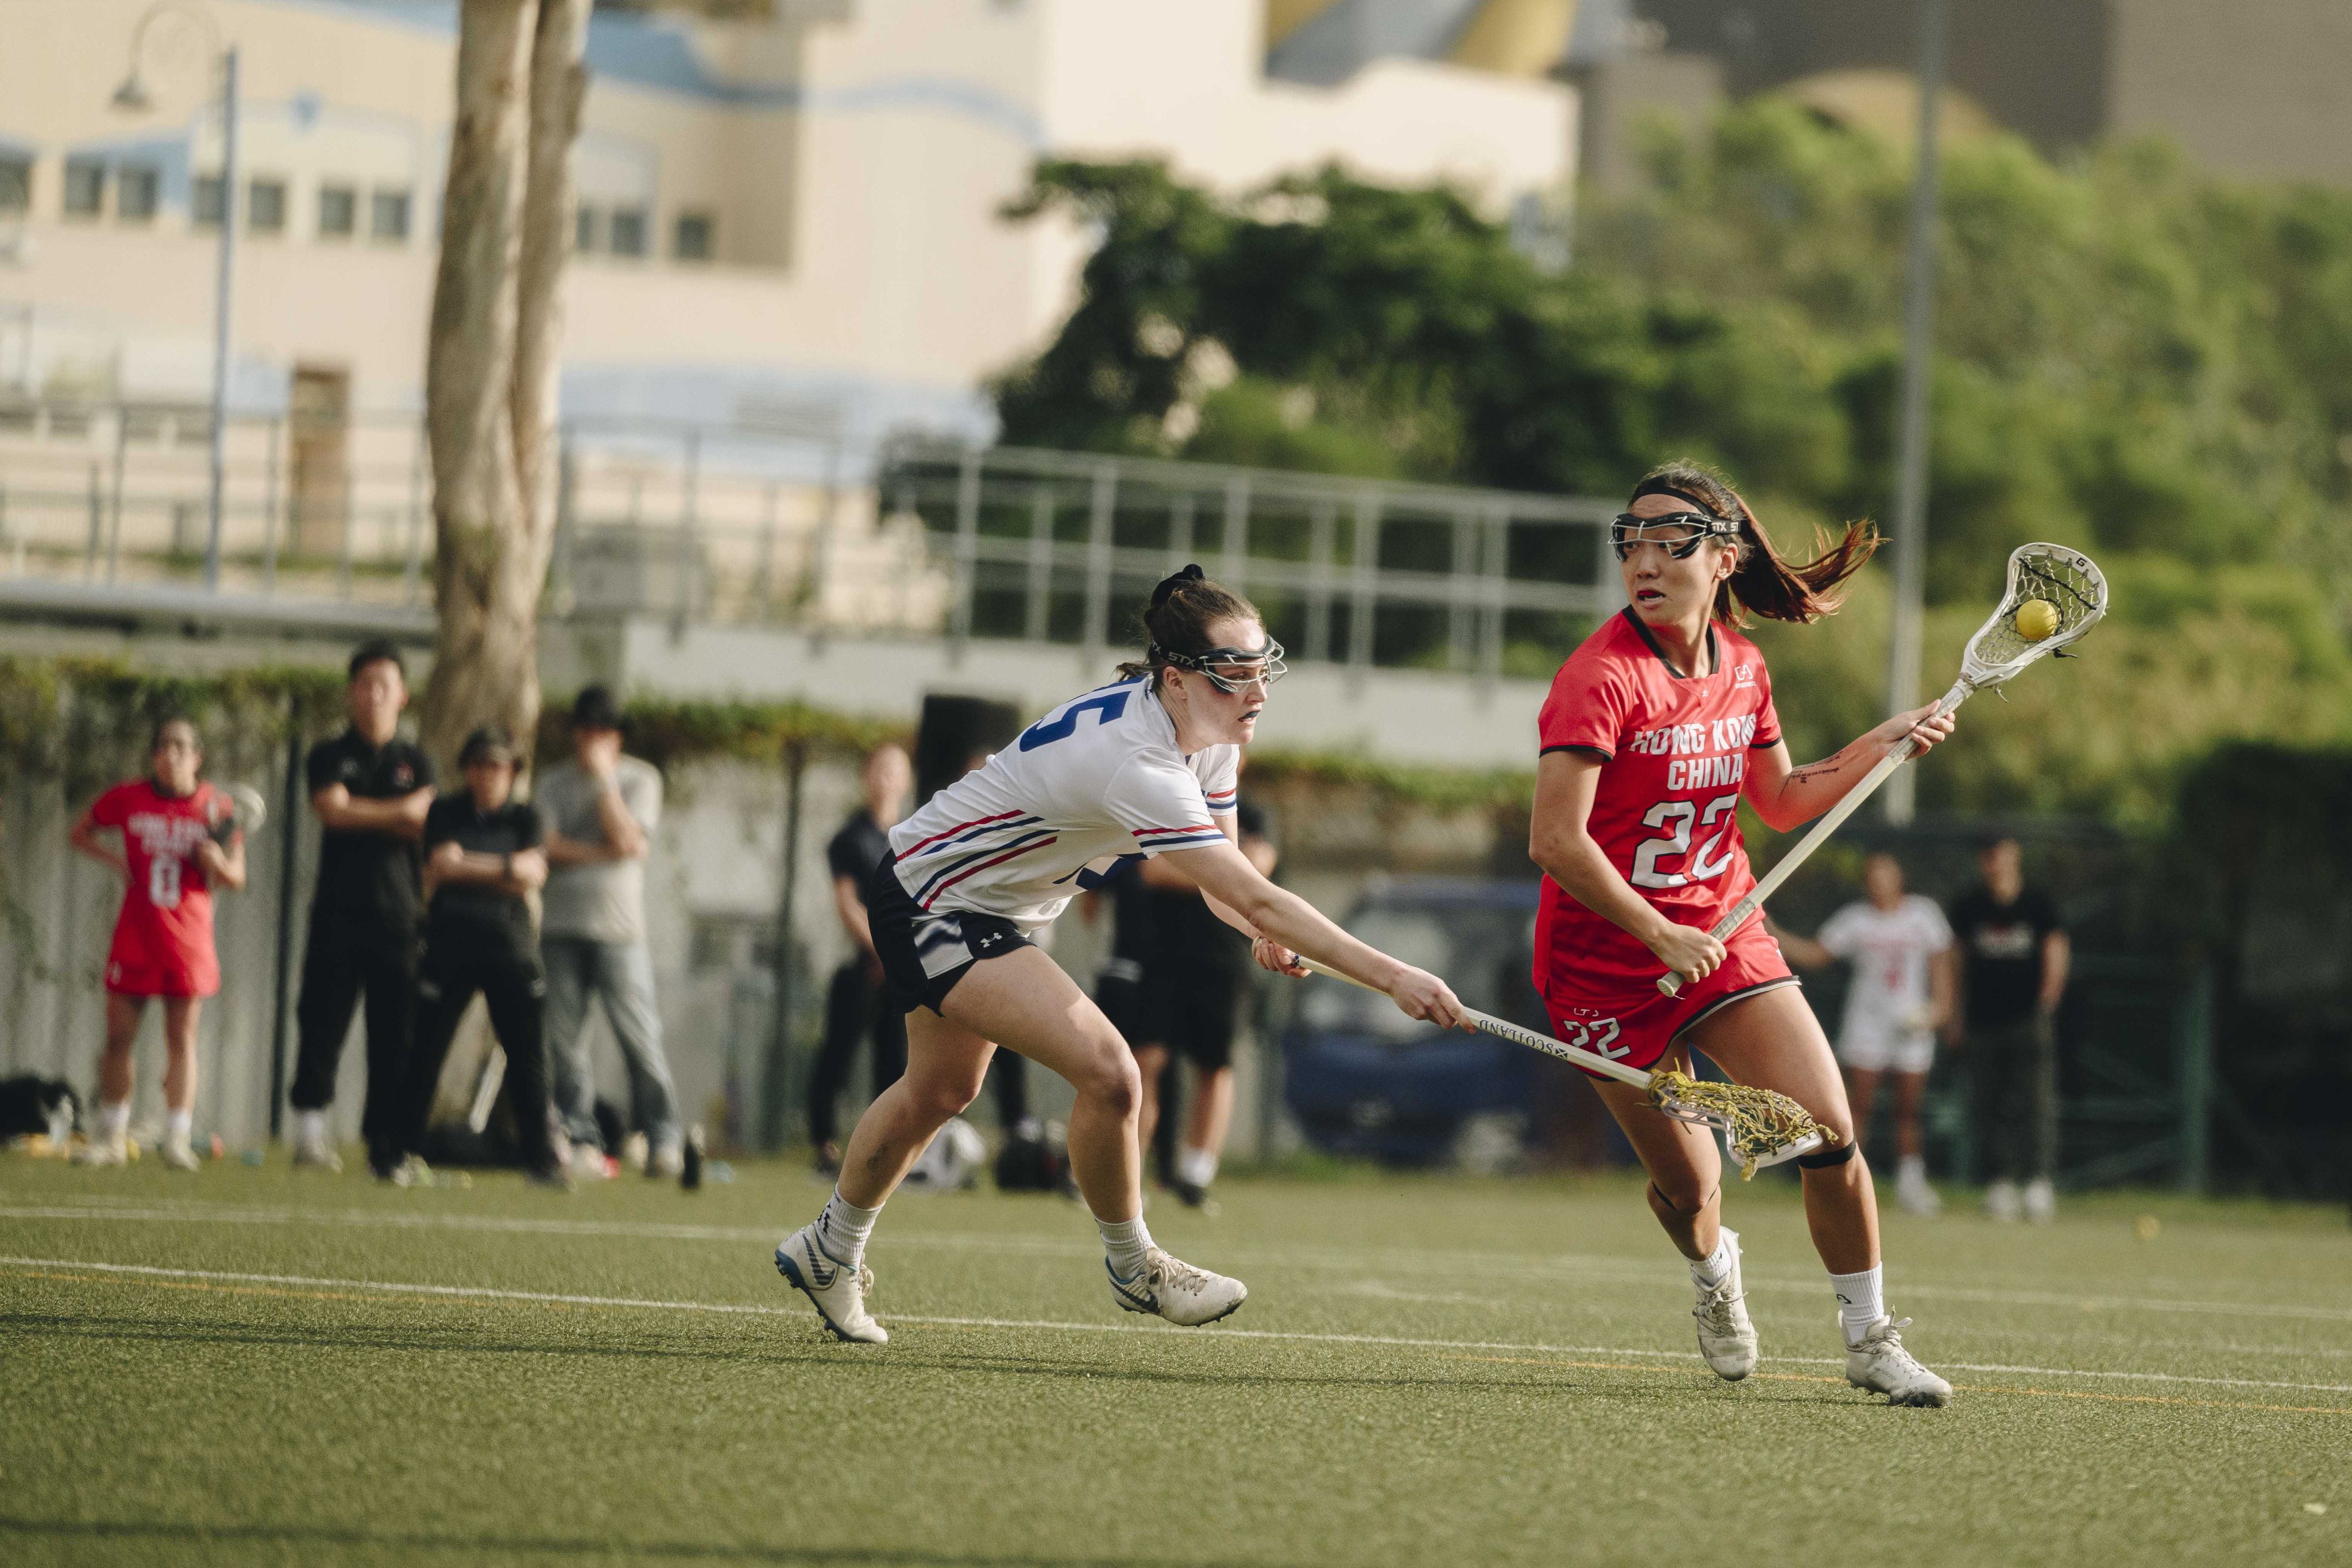 Sally Tang (right) scored a goal and registered an assist in Hong Kong’s defeat to Great Britain. Photo: HK Lacrosse